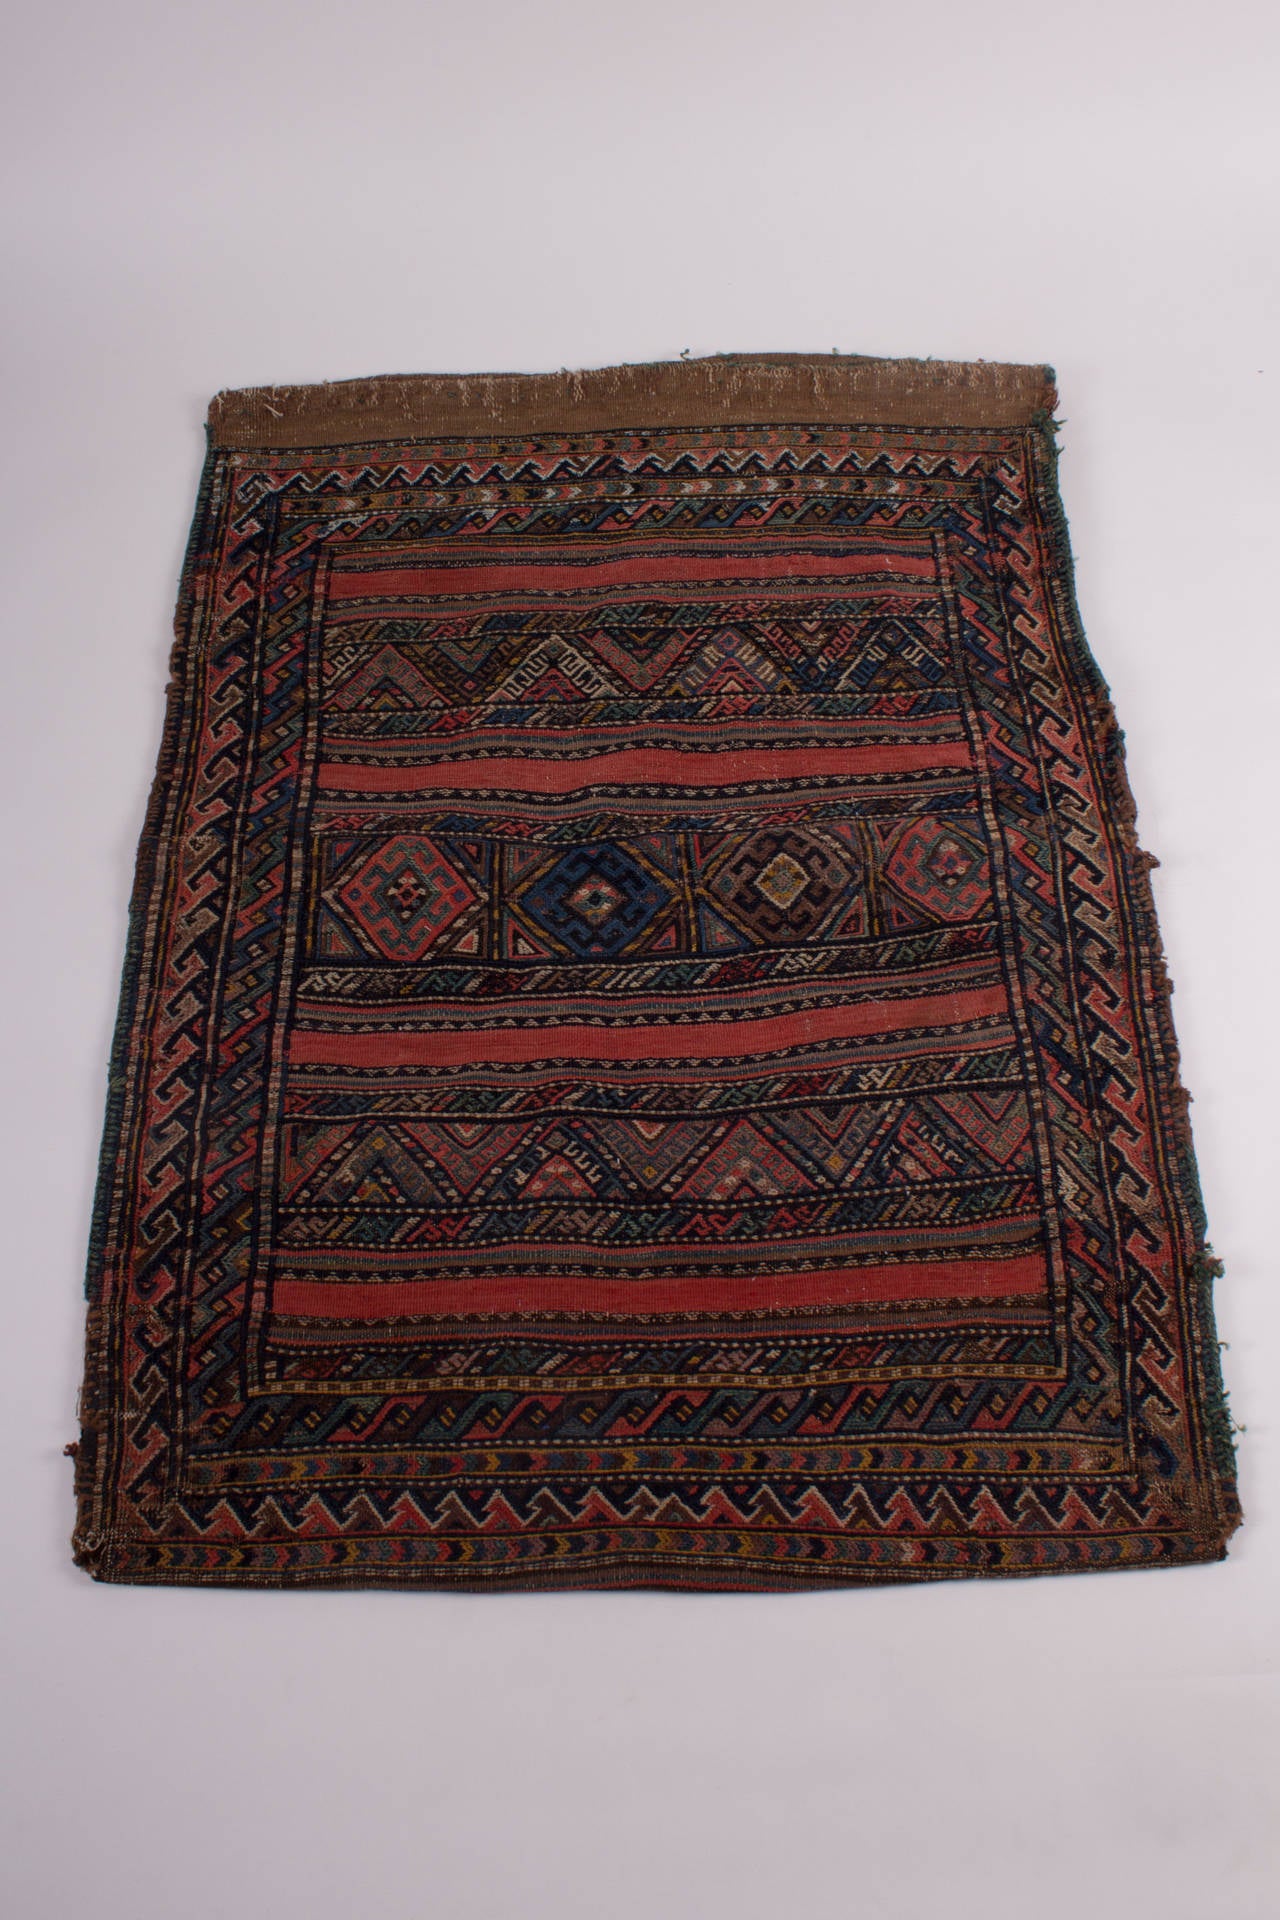 An antique (about 1900), grain sack from Turkmenistan, probably Shahsavan nomads. A colorful, complete Piece with two different kinds of “running dog” borders, also fine, and different kinds of embroideries. 

With bright and brilliant colors, all